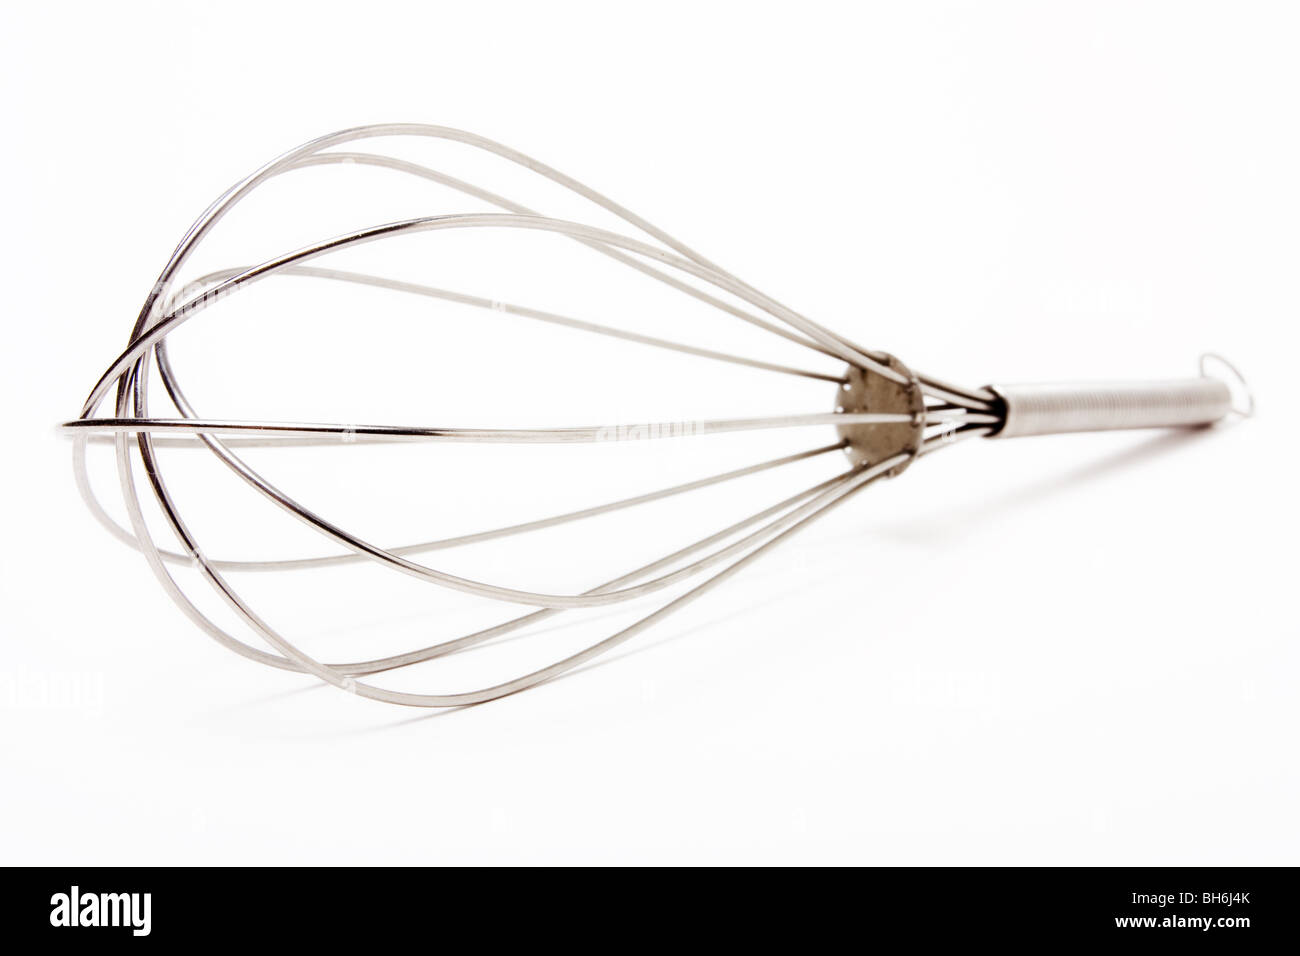 Stainless steel chef's whisk isolated against white background. Stock Photo